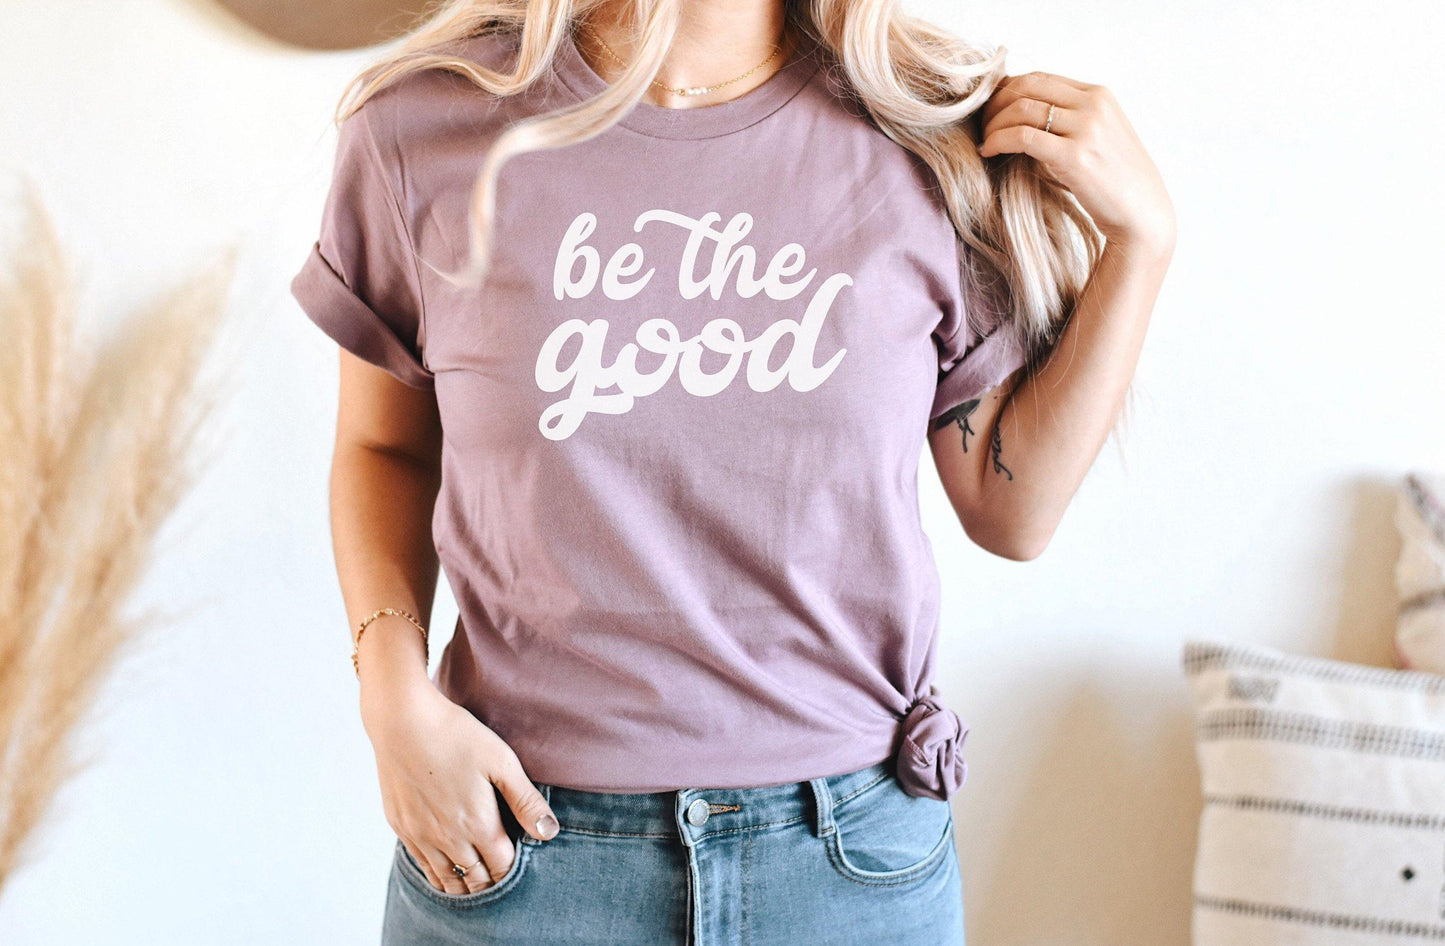 Be The Good - Orchid